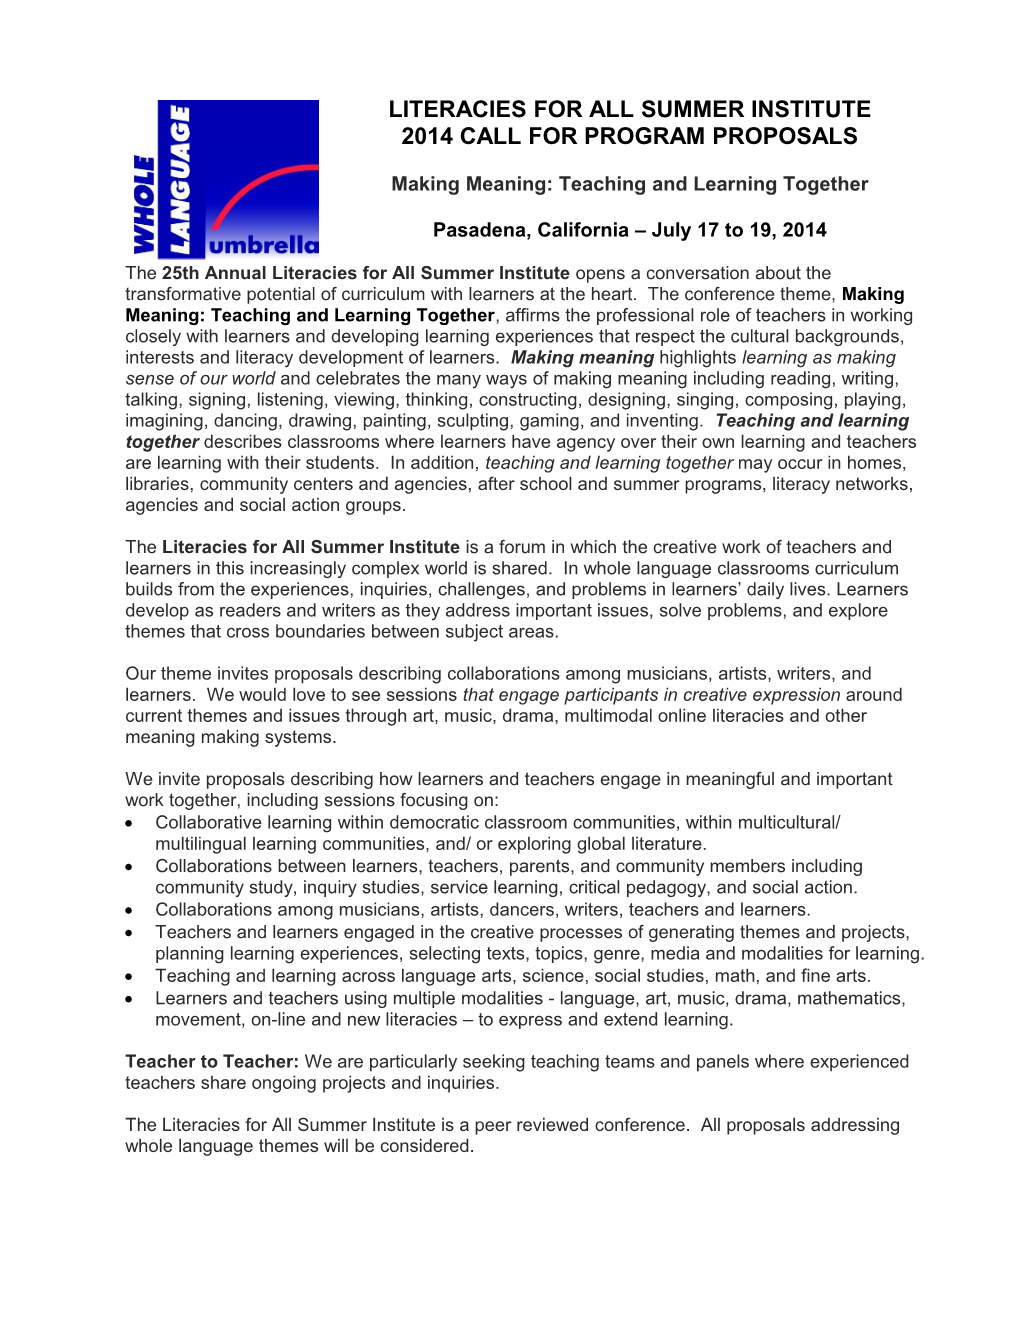 Making Meaning: Teaching and Learning Together